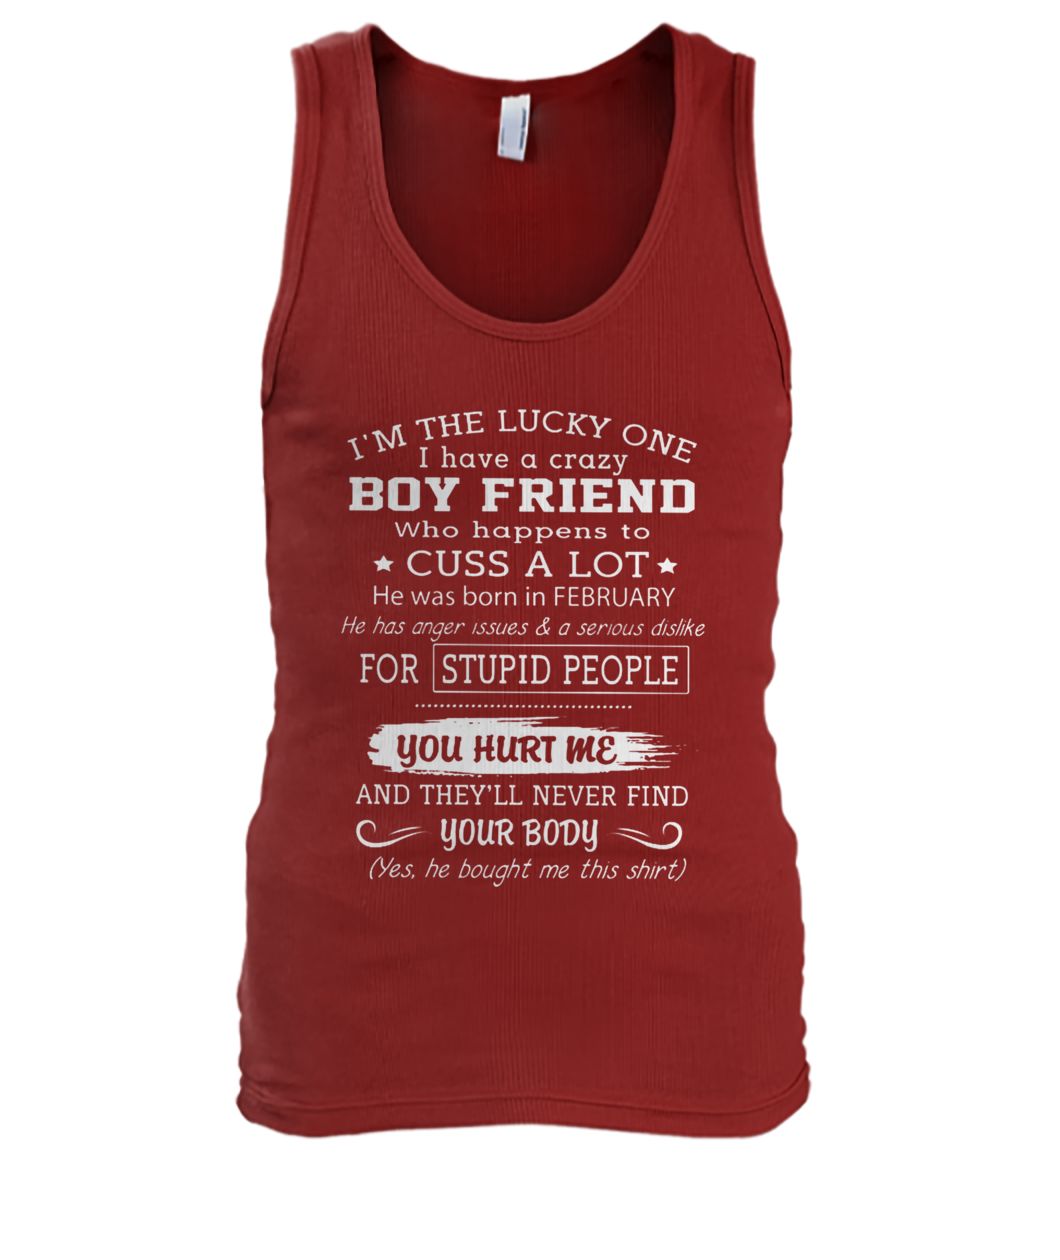 I'm the luck one who have a crazy boy friend who happens to cuss a lot men's tank top